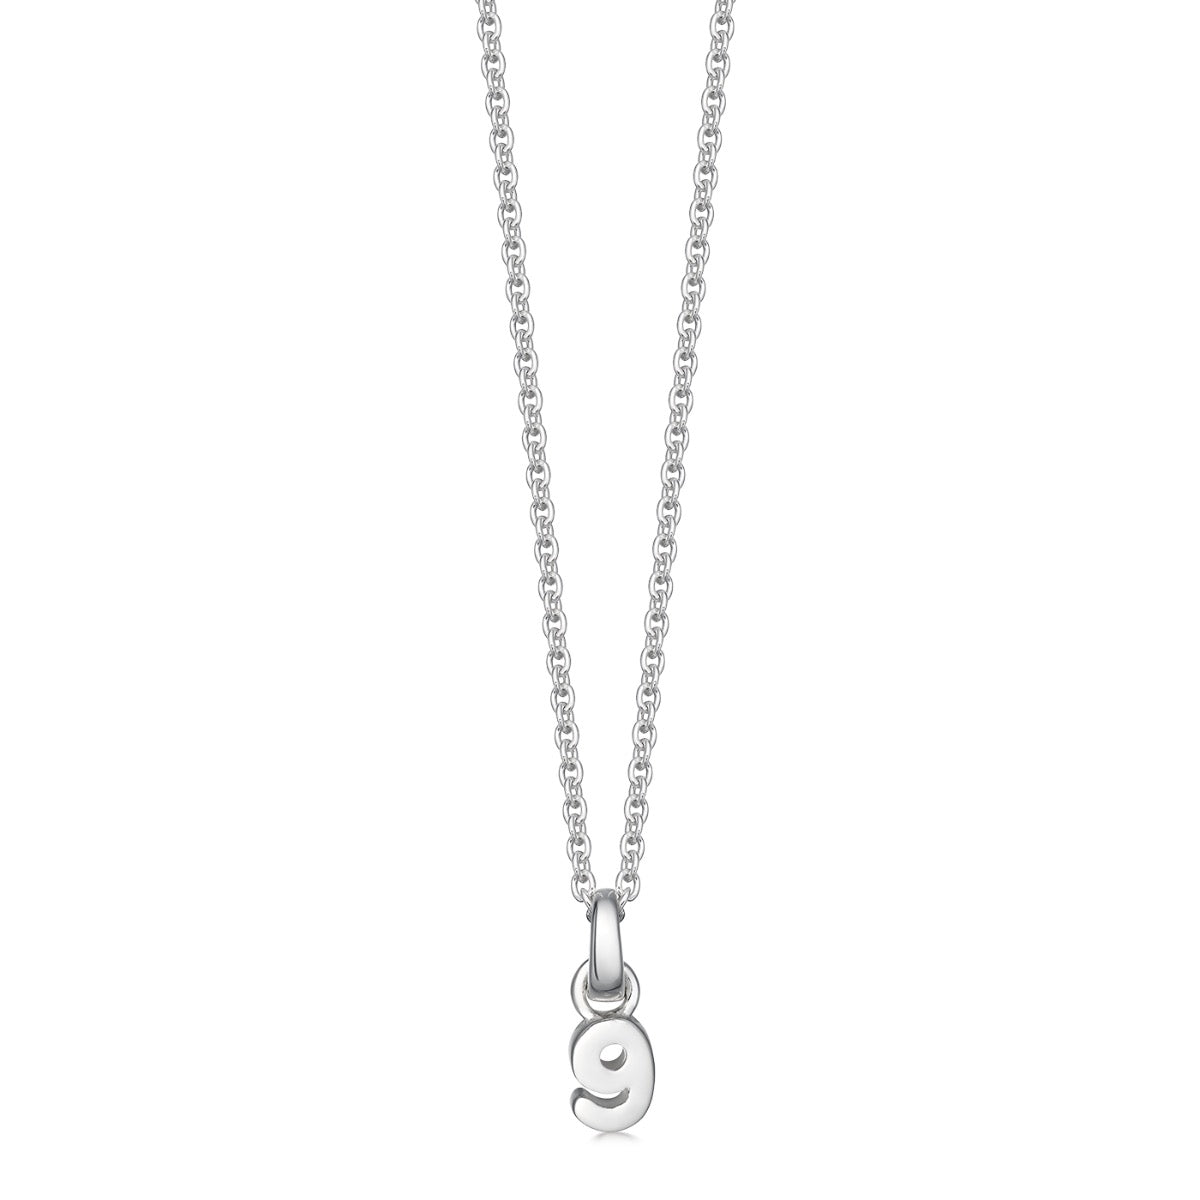 Silver Number 9 Pendant Necklace | |Hersey & Son Silversmiths